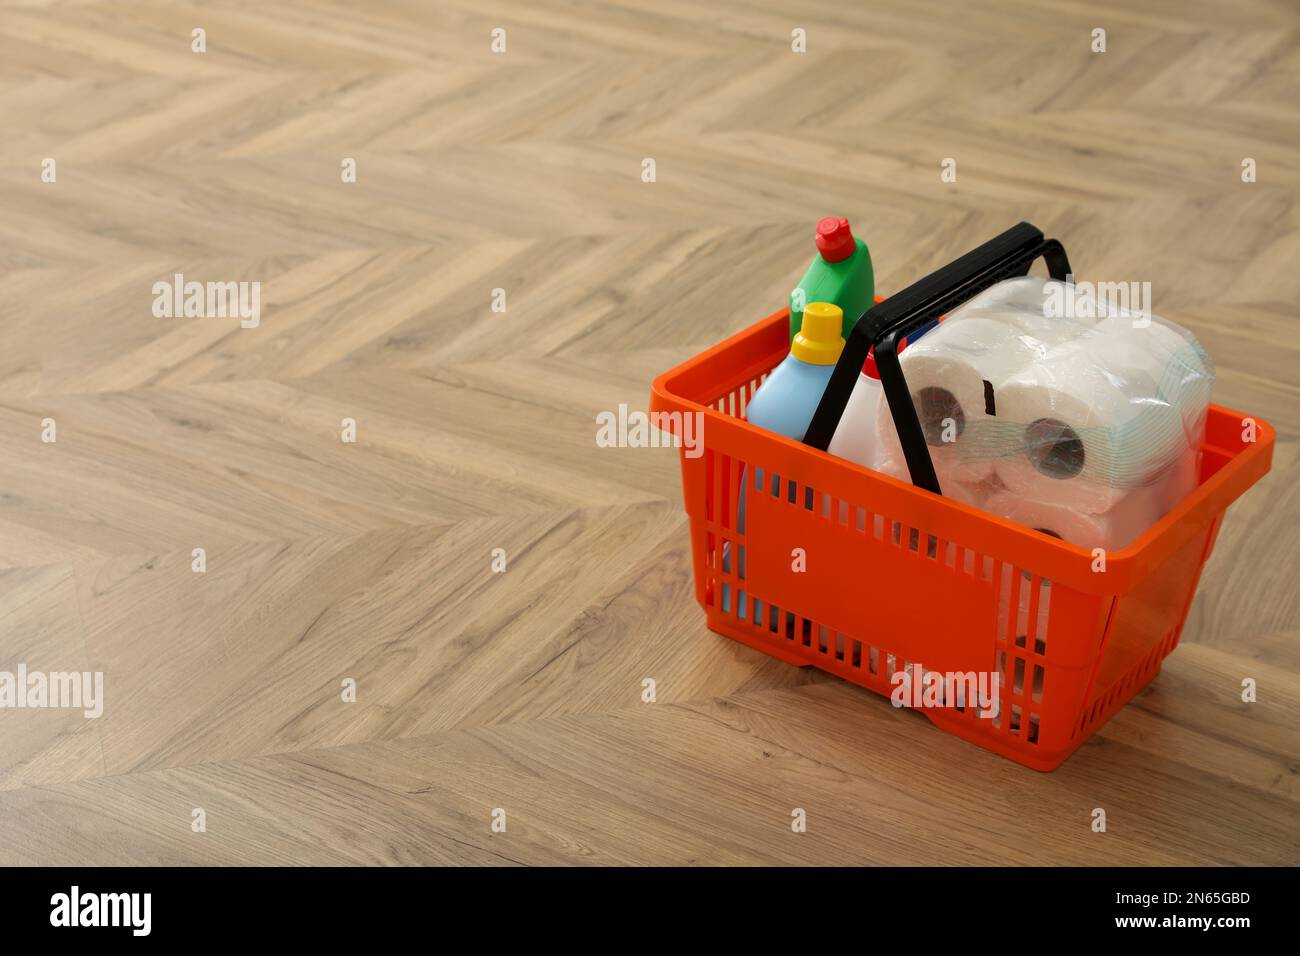 Shopping basket with household goods on wooden floor. Space for text Stock Photo